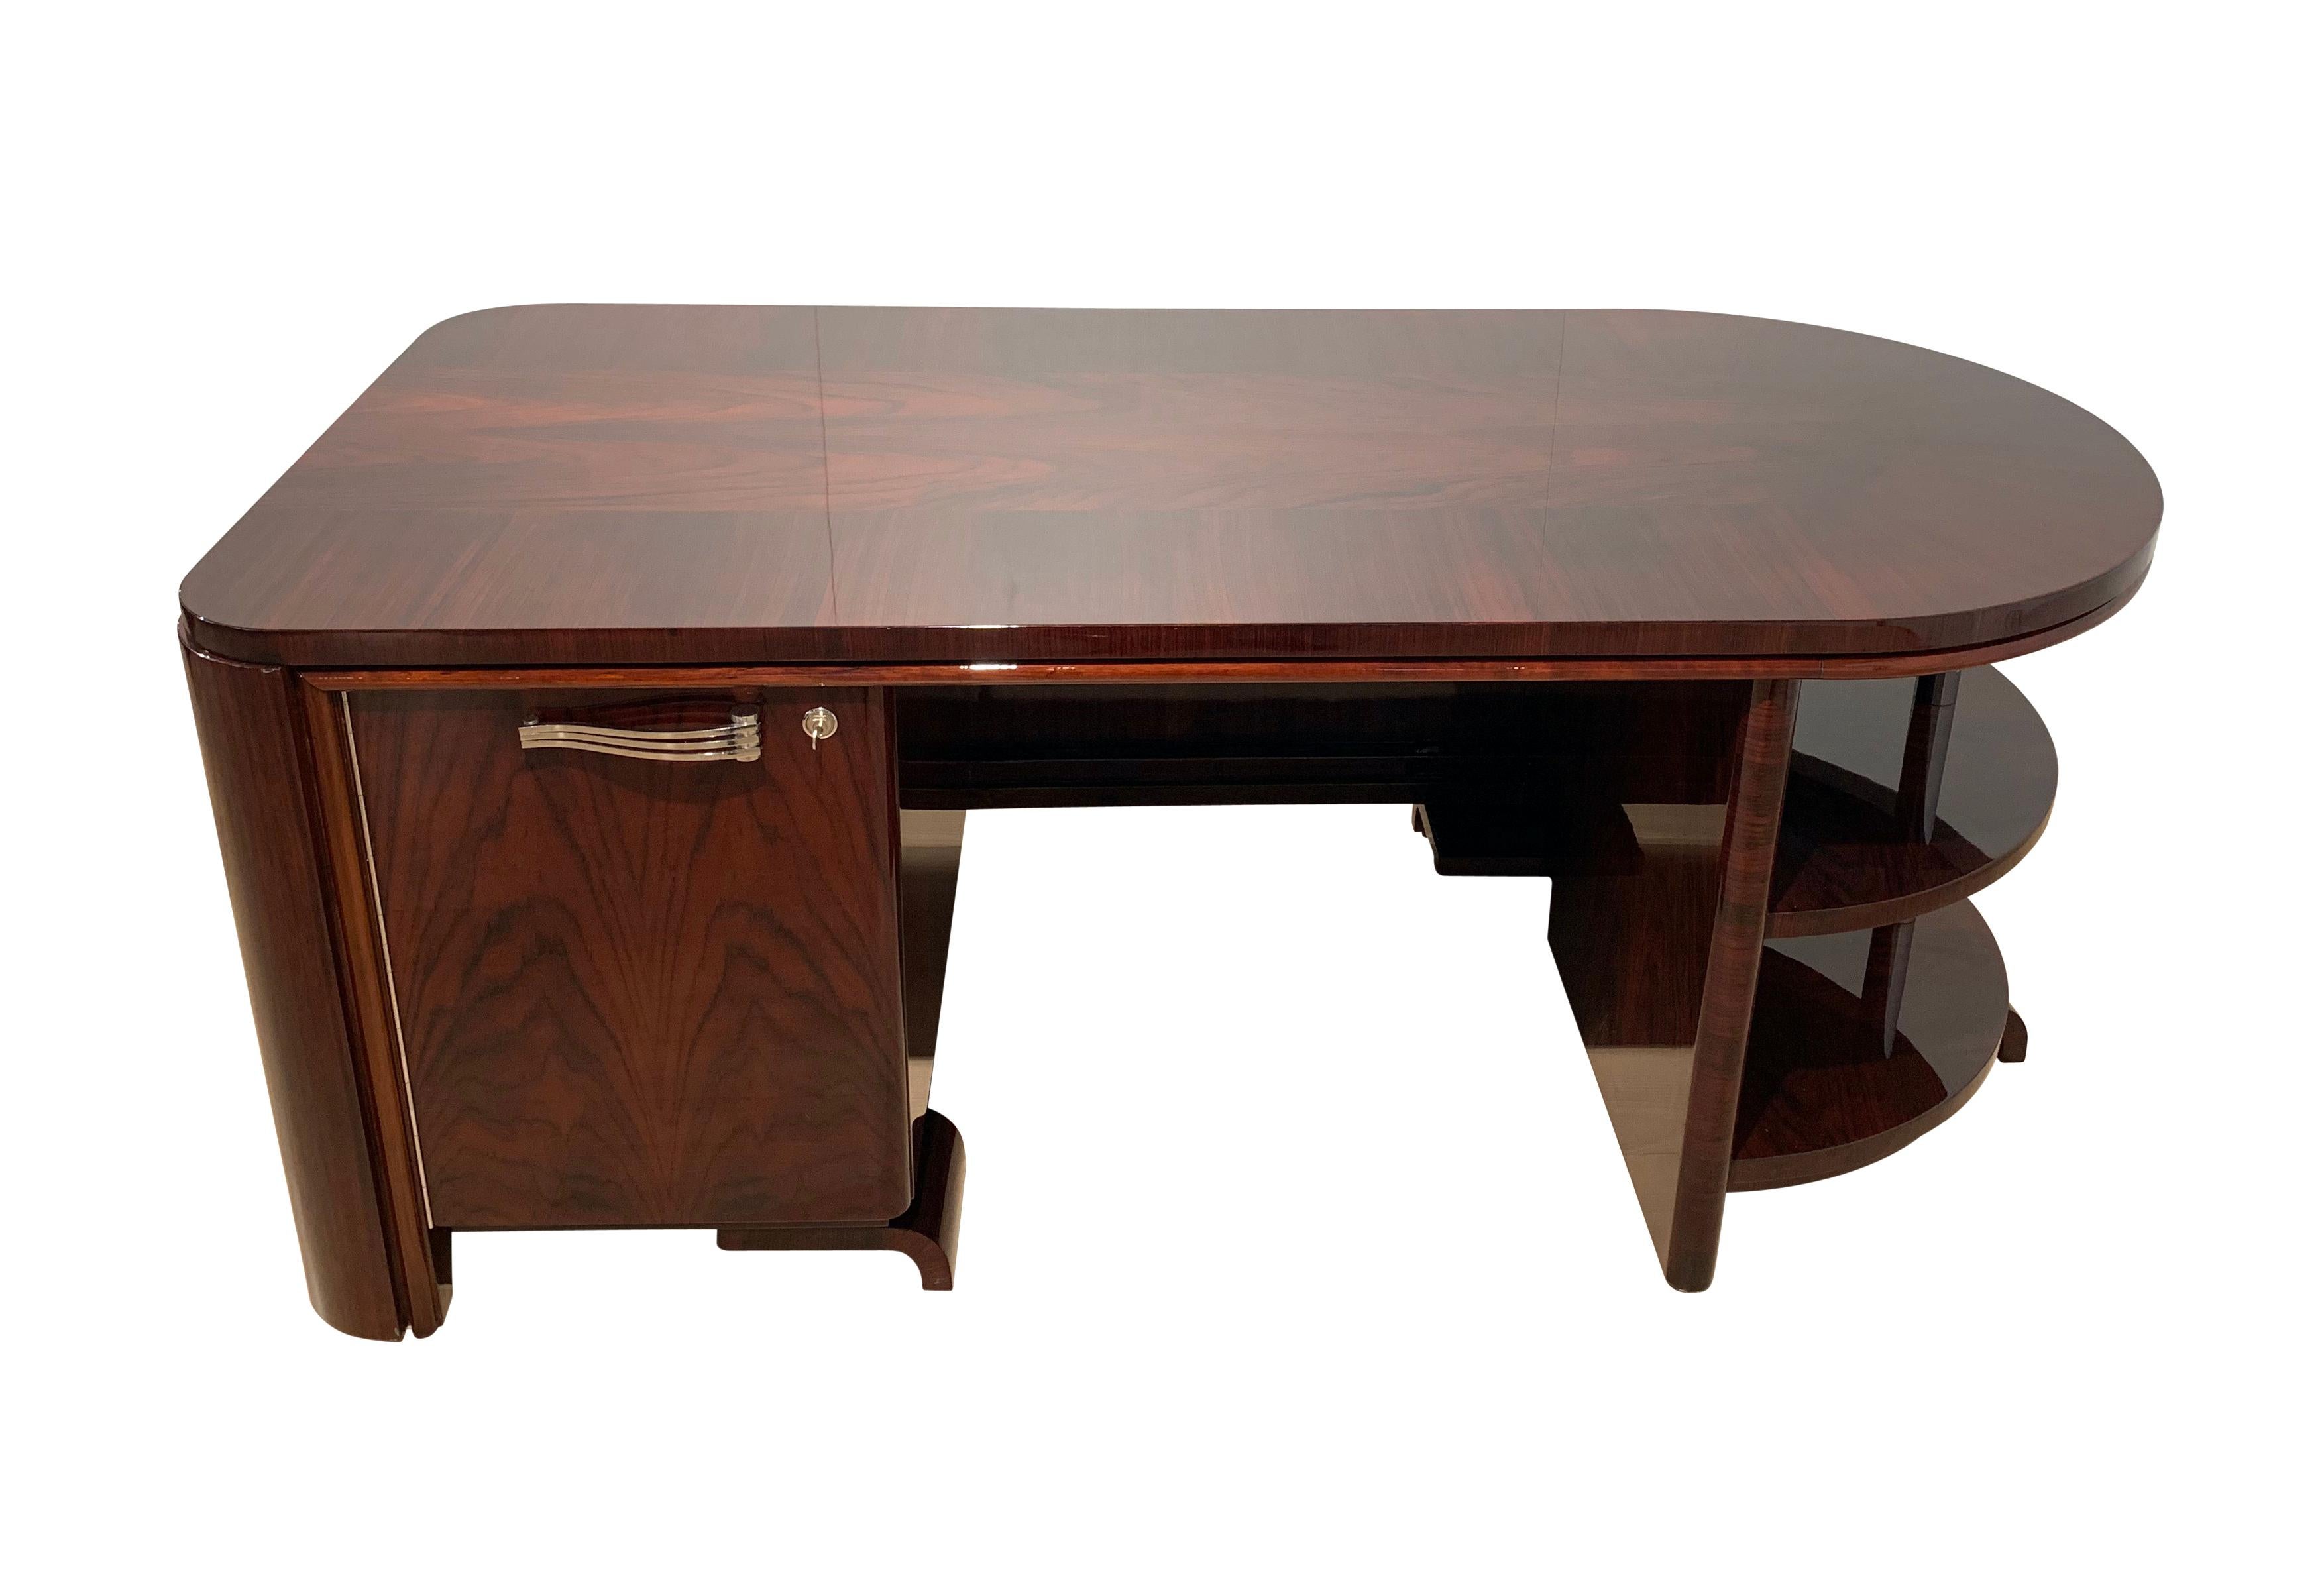 Original, restored french Art Deco Desk with leather swivel armchair from circa 1930s. 

Gorgeous Rosewood veneered and excellently lacquered with high-gloss clear piano lacquer. 
Beautiful veneer setting on the writing plate. Nickel-plated original